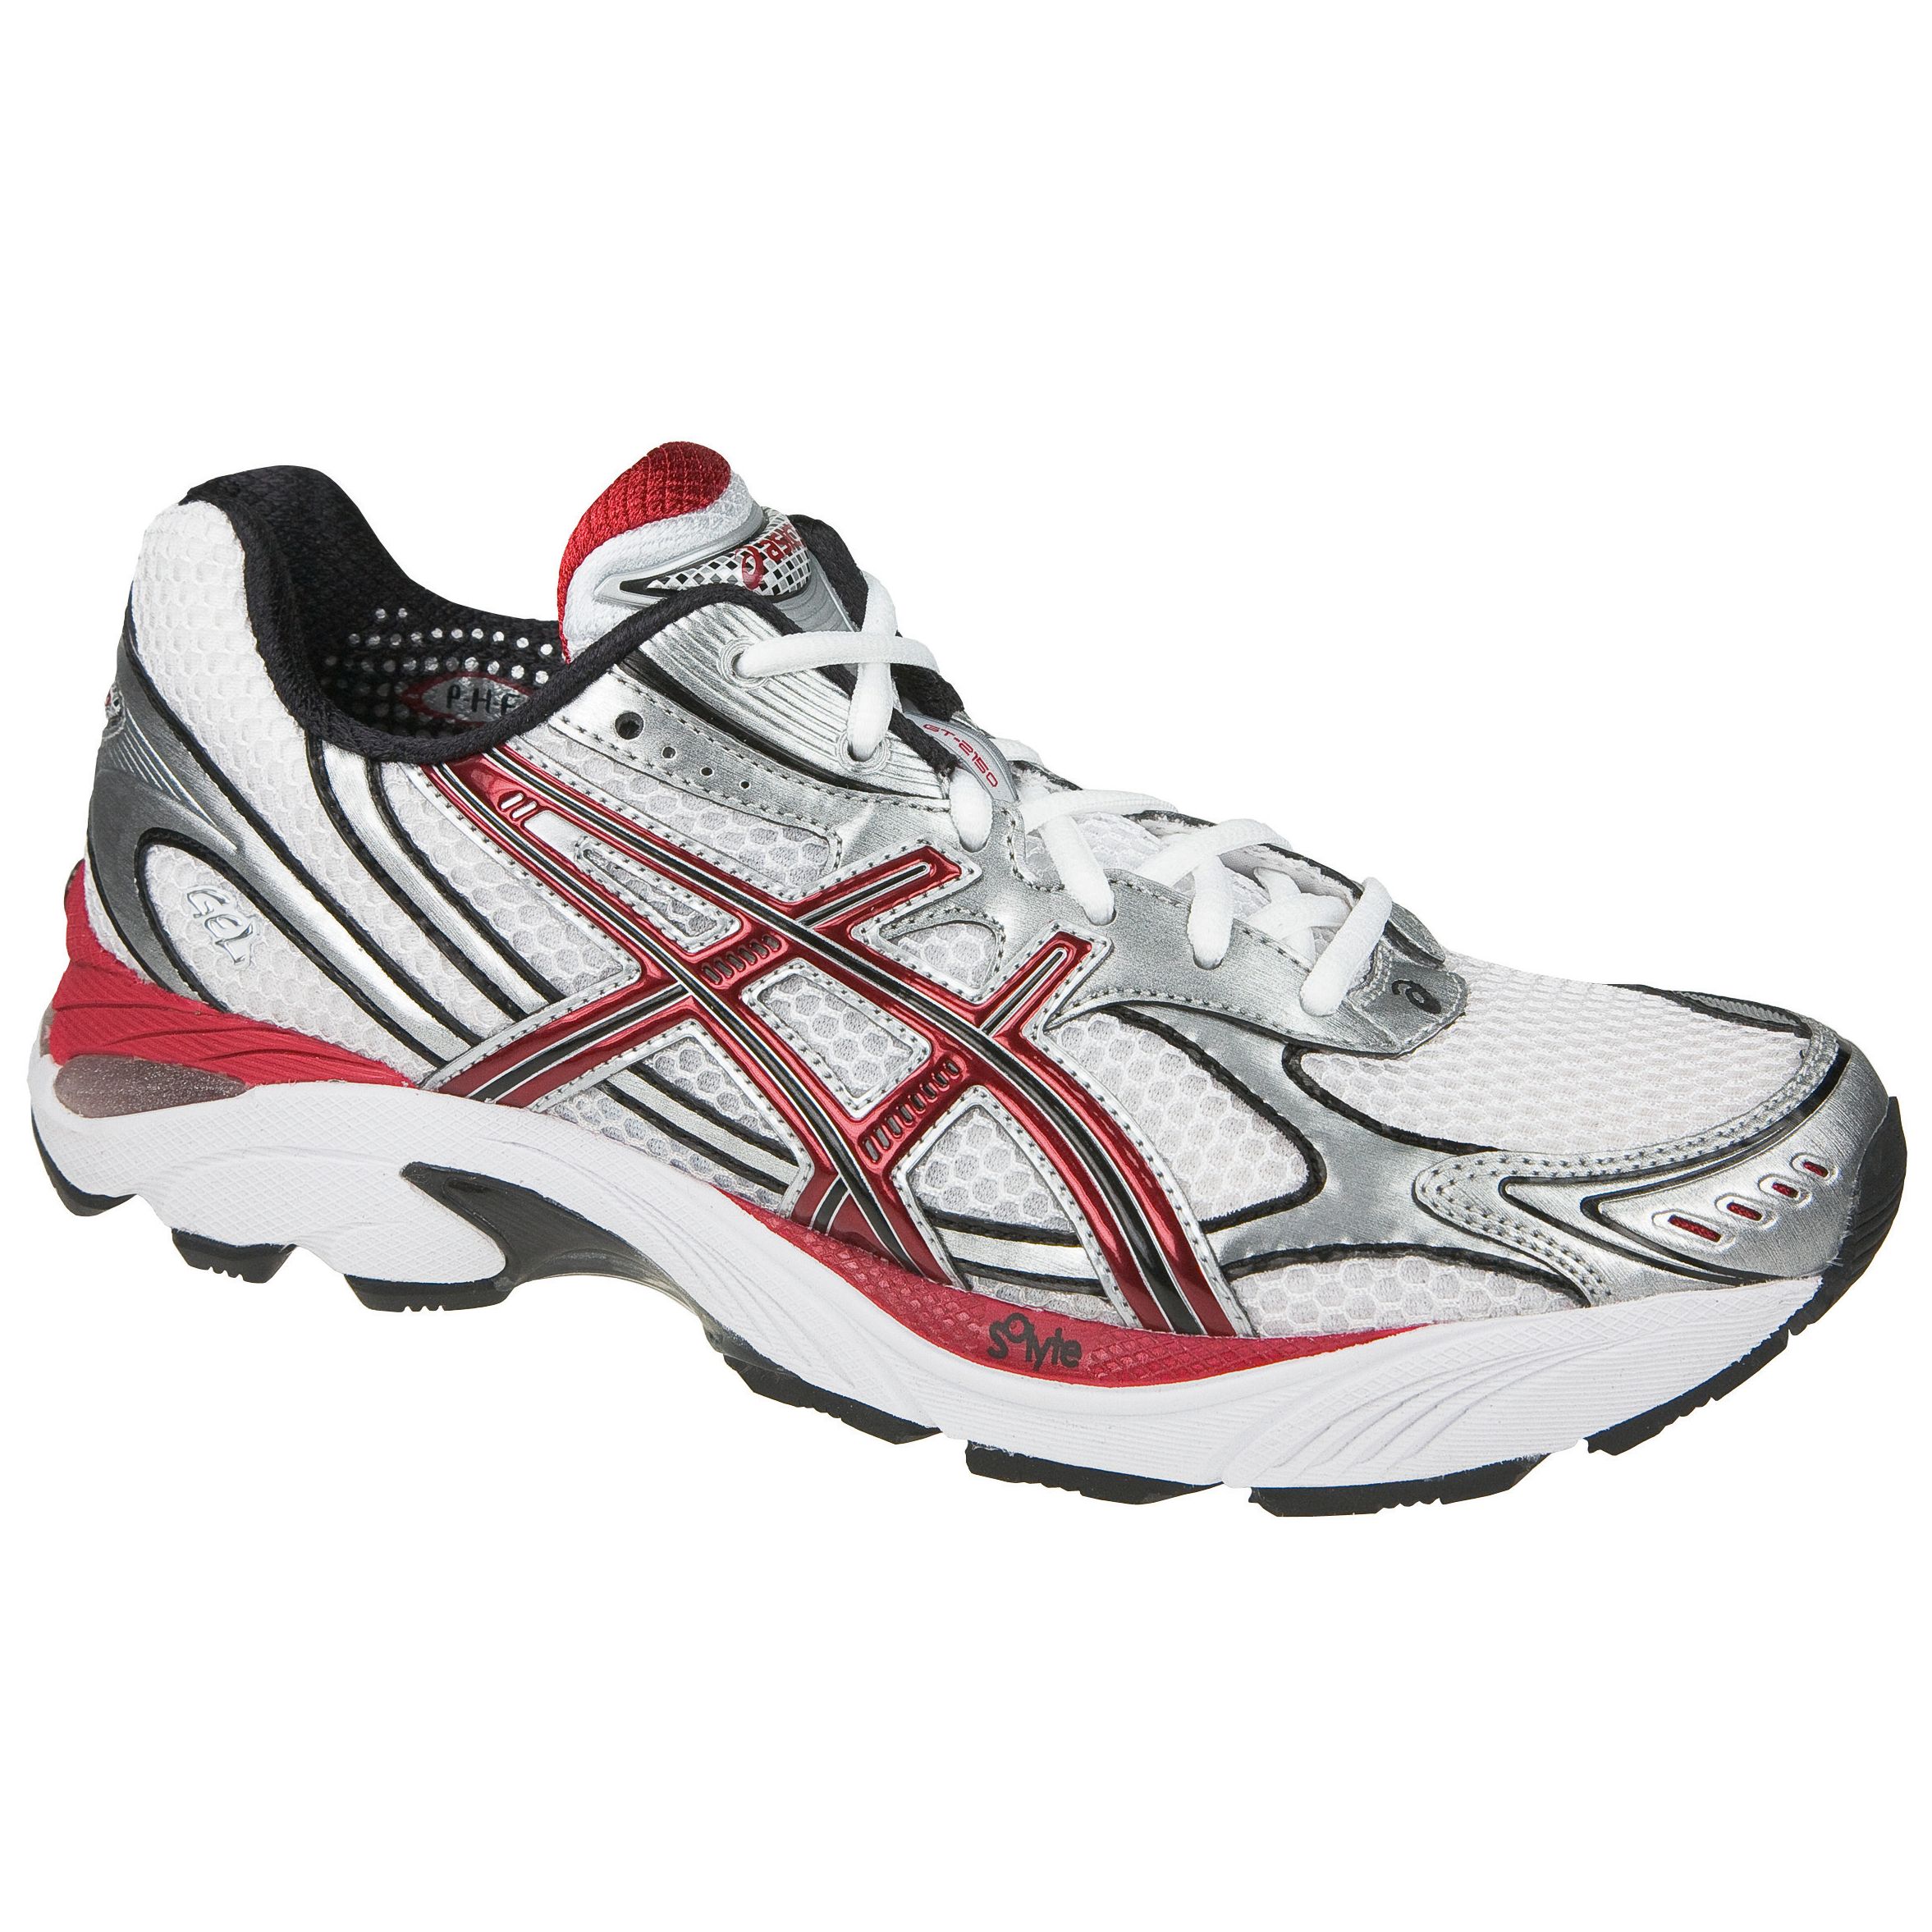 Asics GT2150 Running Shoes, White/red, 9.5